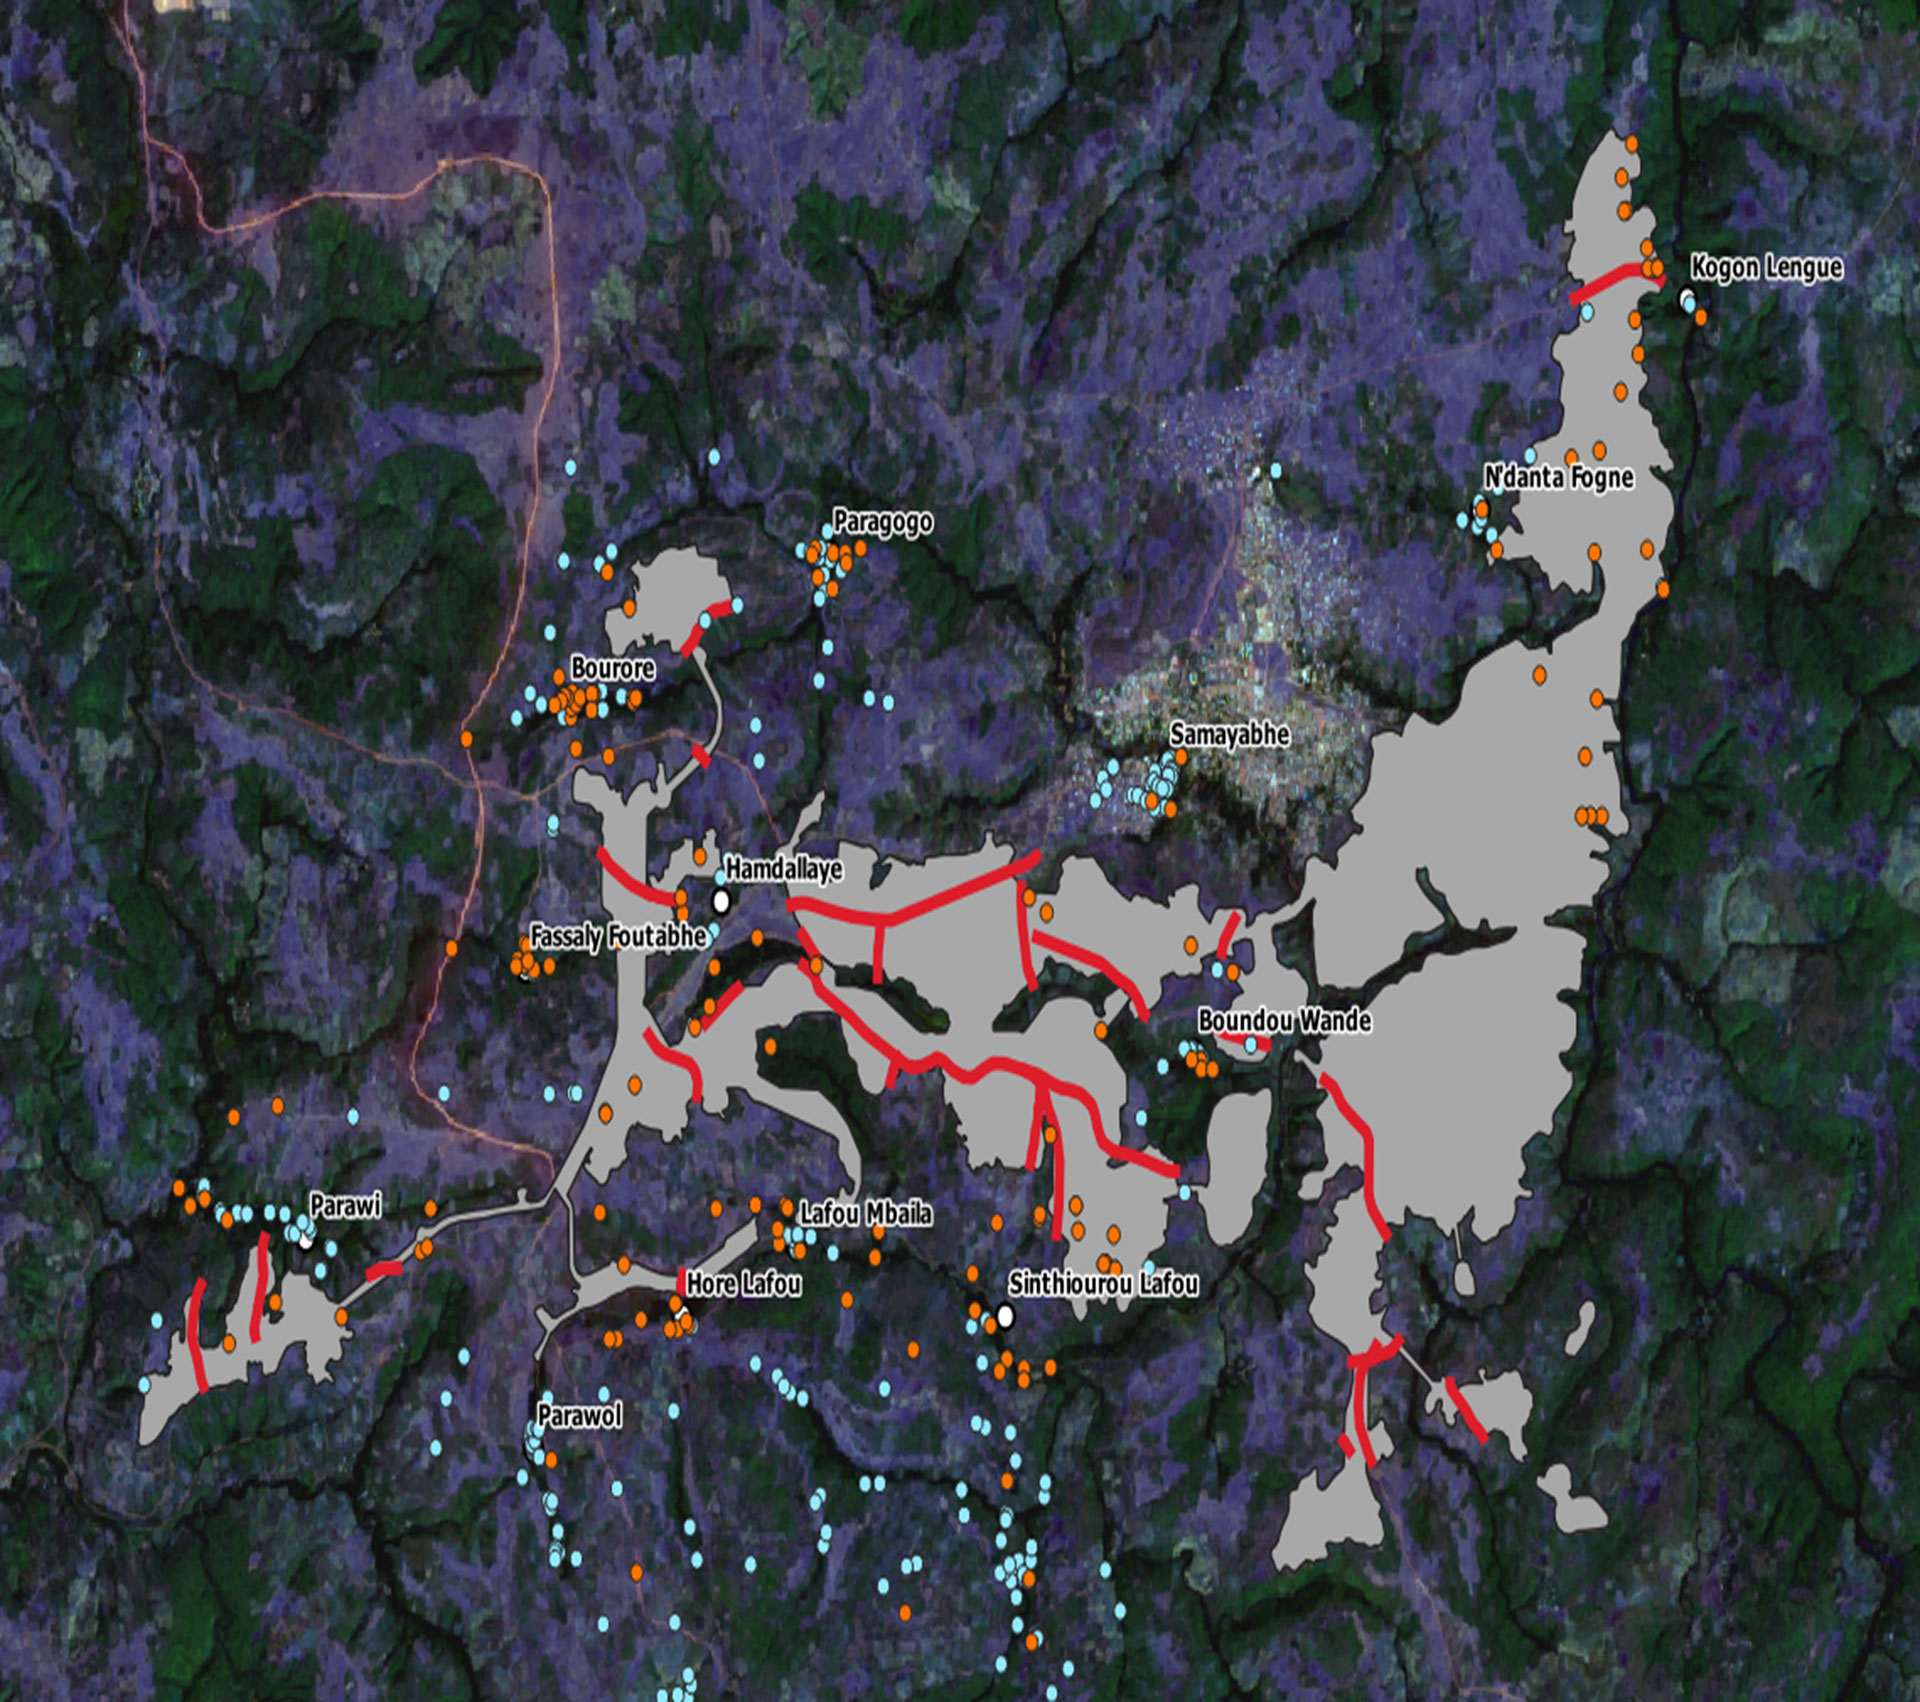 Figure 2. Landsat satellite imagery of a bauxite mine in Guinea from 2019; overlay shows water sources based on participatory mapping. Grey shows the mine extent, red shows paths and tracks that have been disrupted by the mine.  Orange and blue show impacted and intact water sources, respectively, as reported by the local communities.